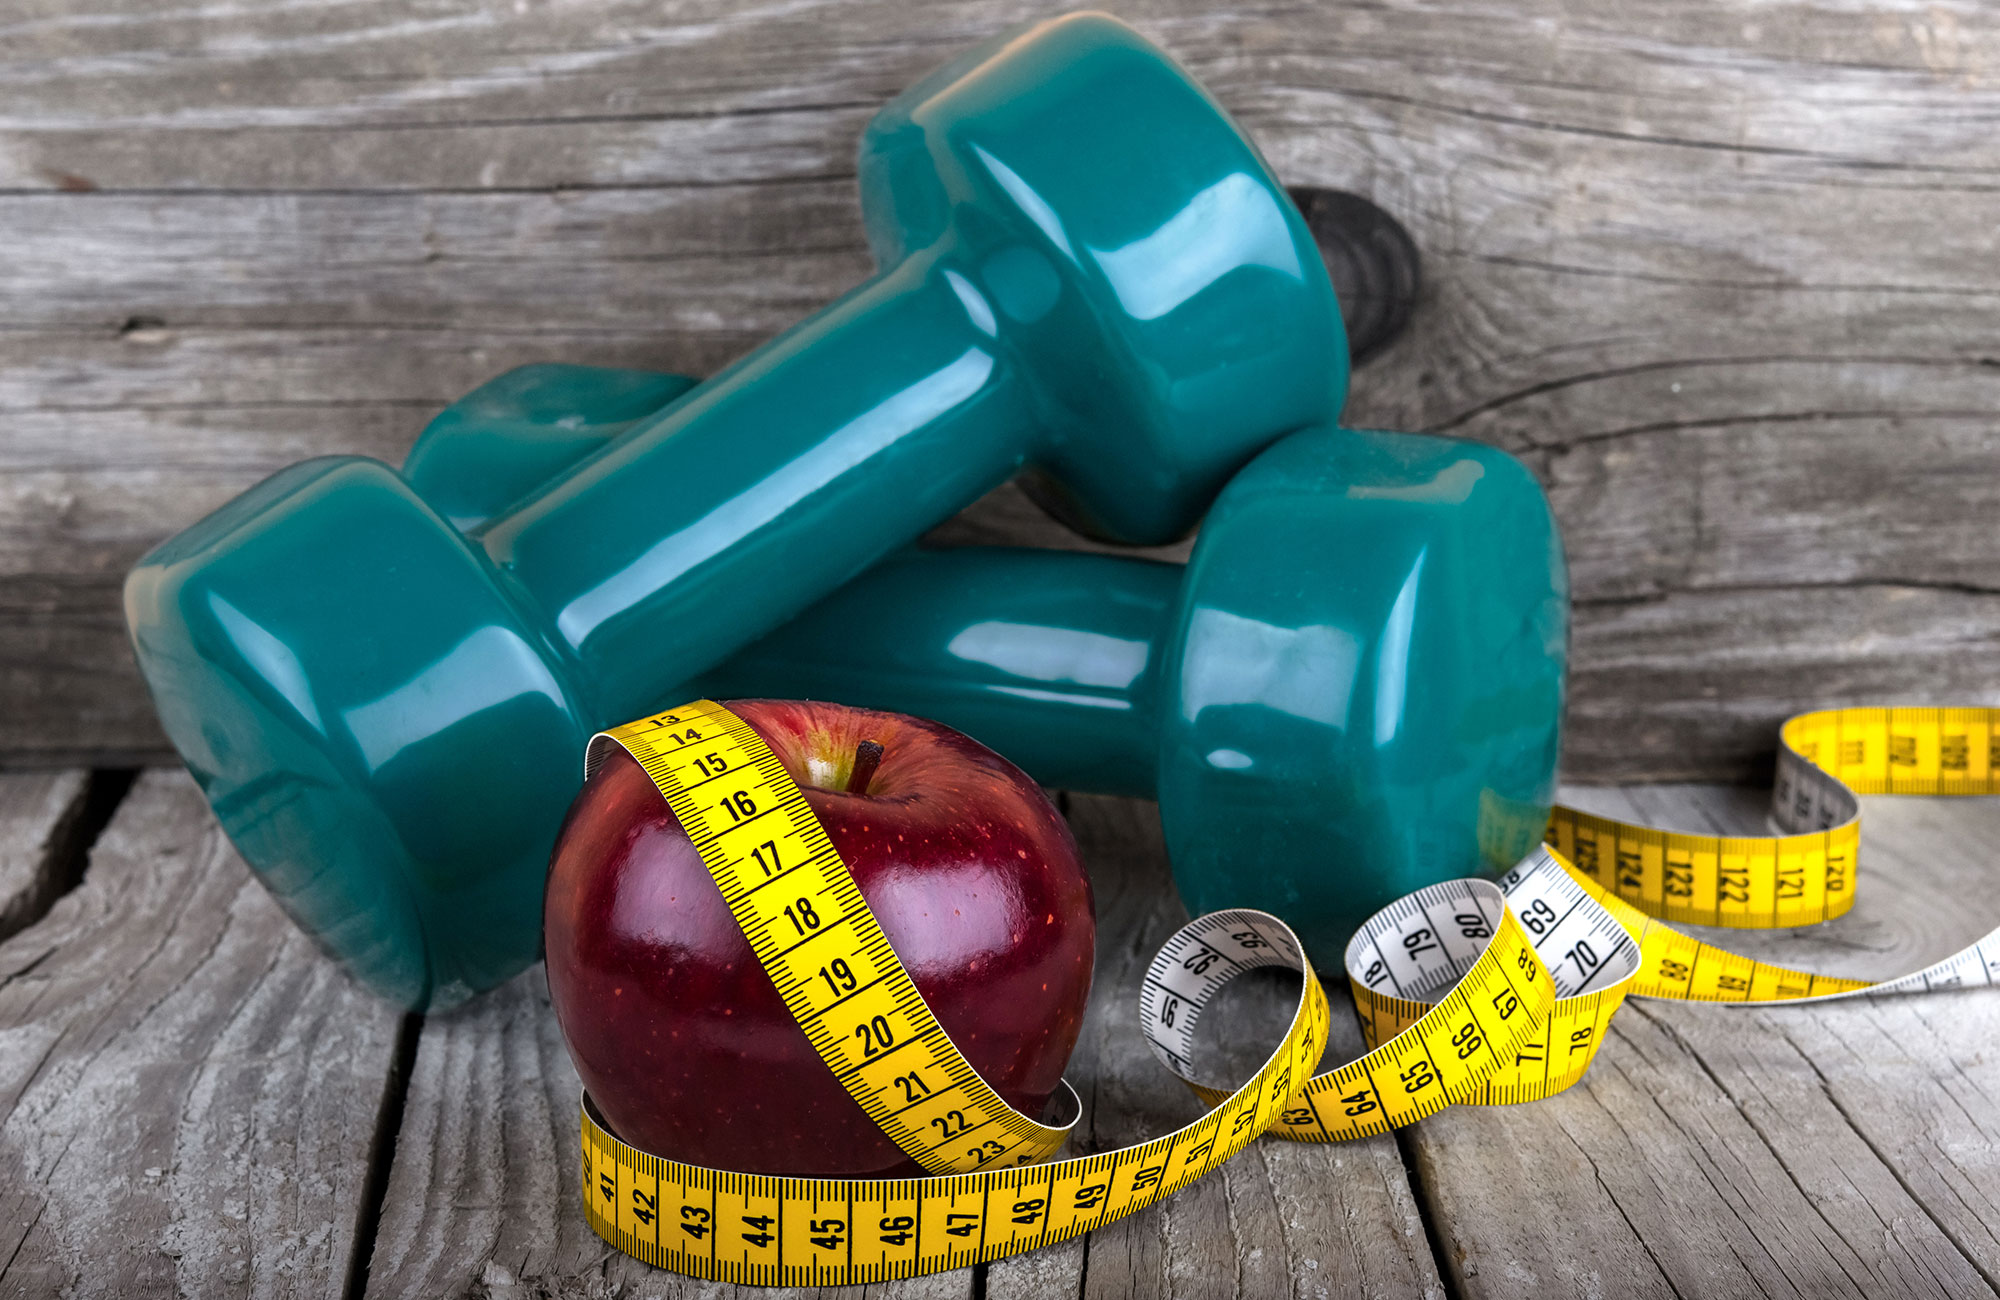 Weight loss tools including dumbbells, apple, and measuring tape